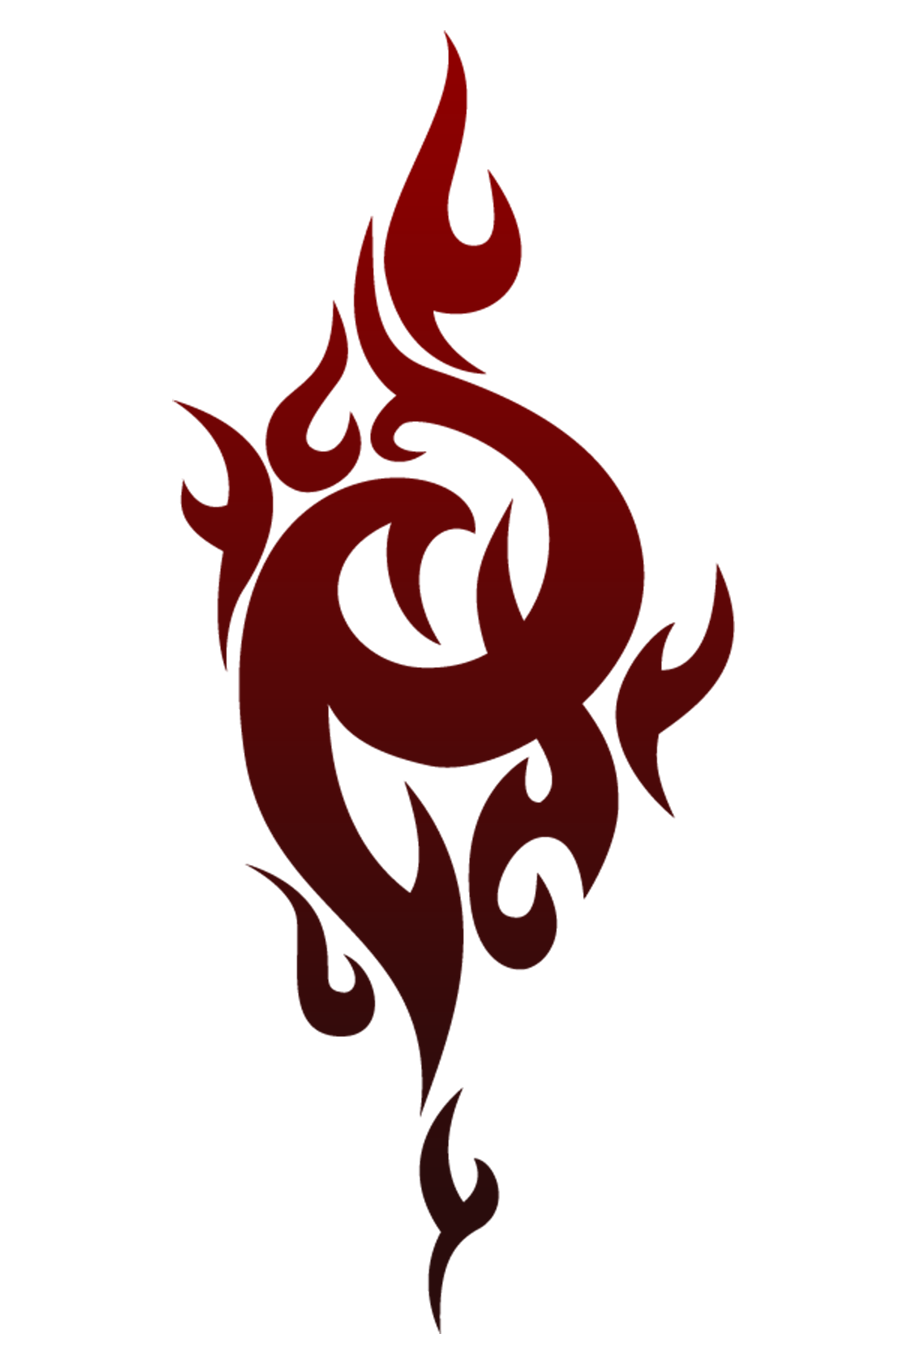 K Project Red Clan Logo